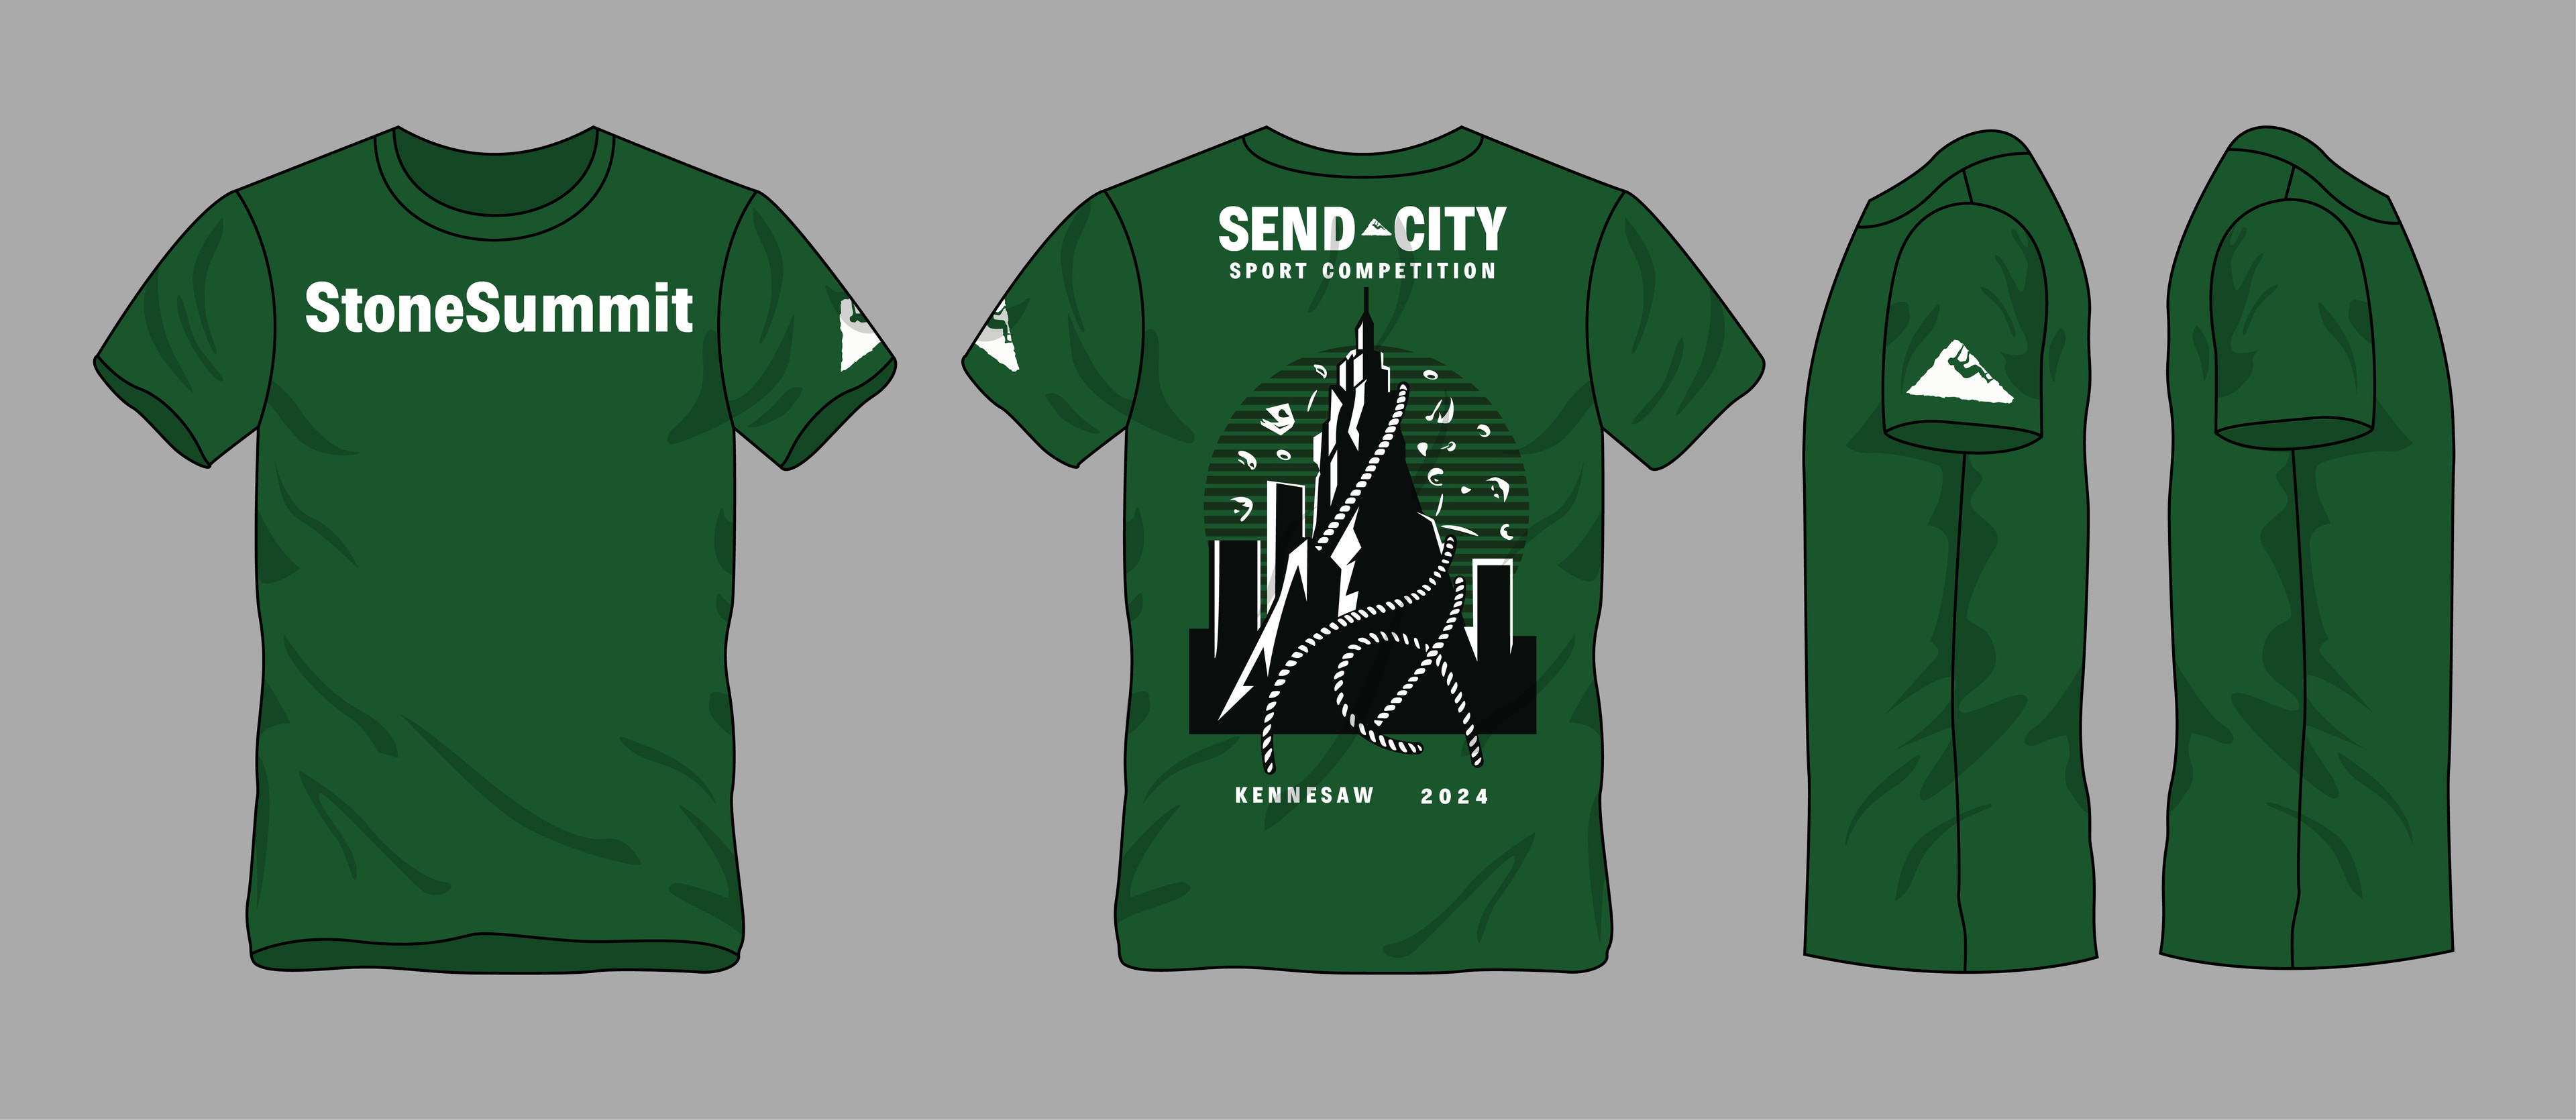 2024 T-shirt design for Stone Summit Climbing and Fitness Center's annual Send City sport climbing competition.